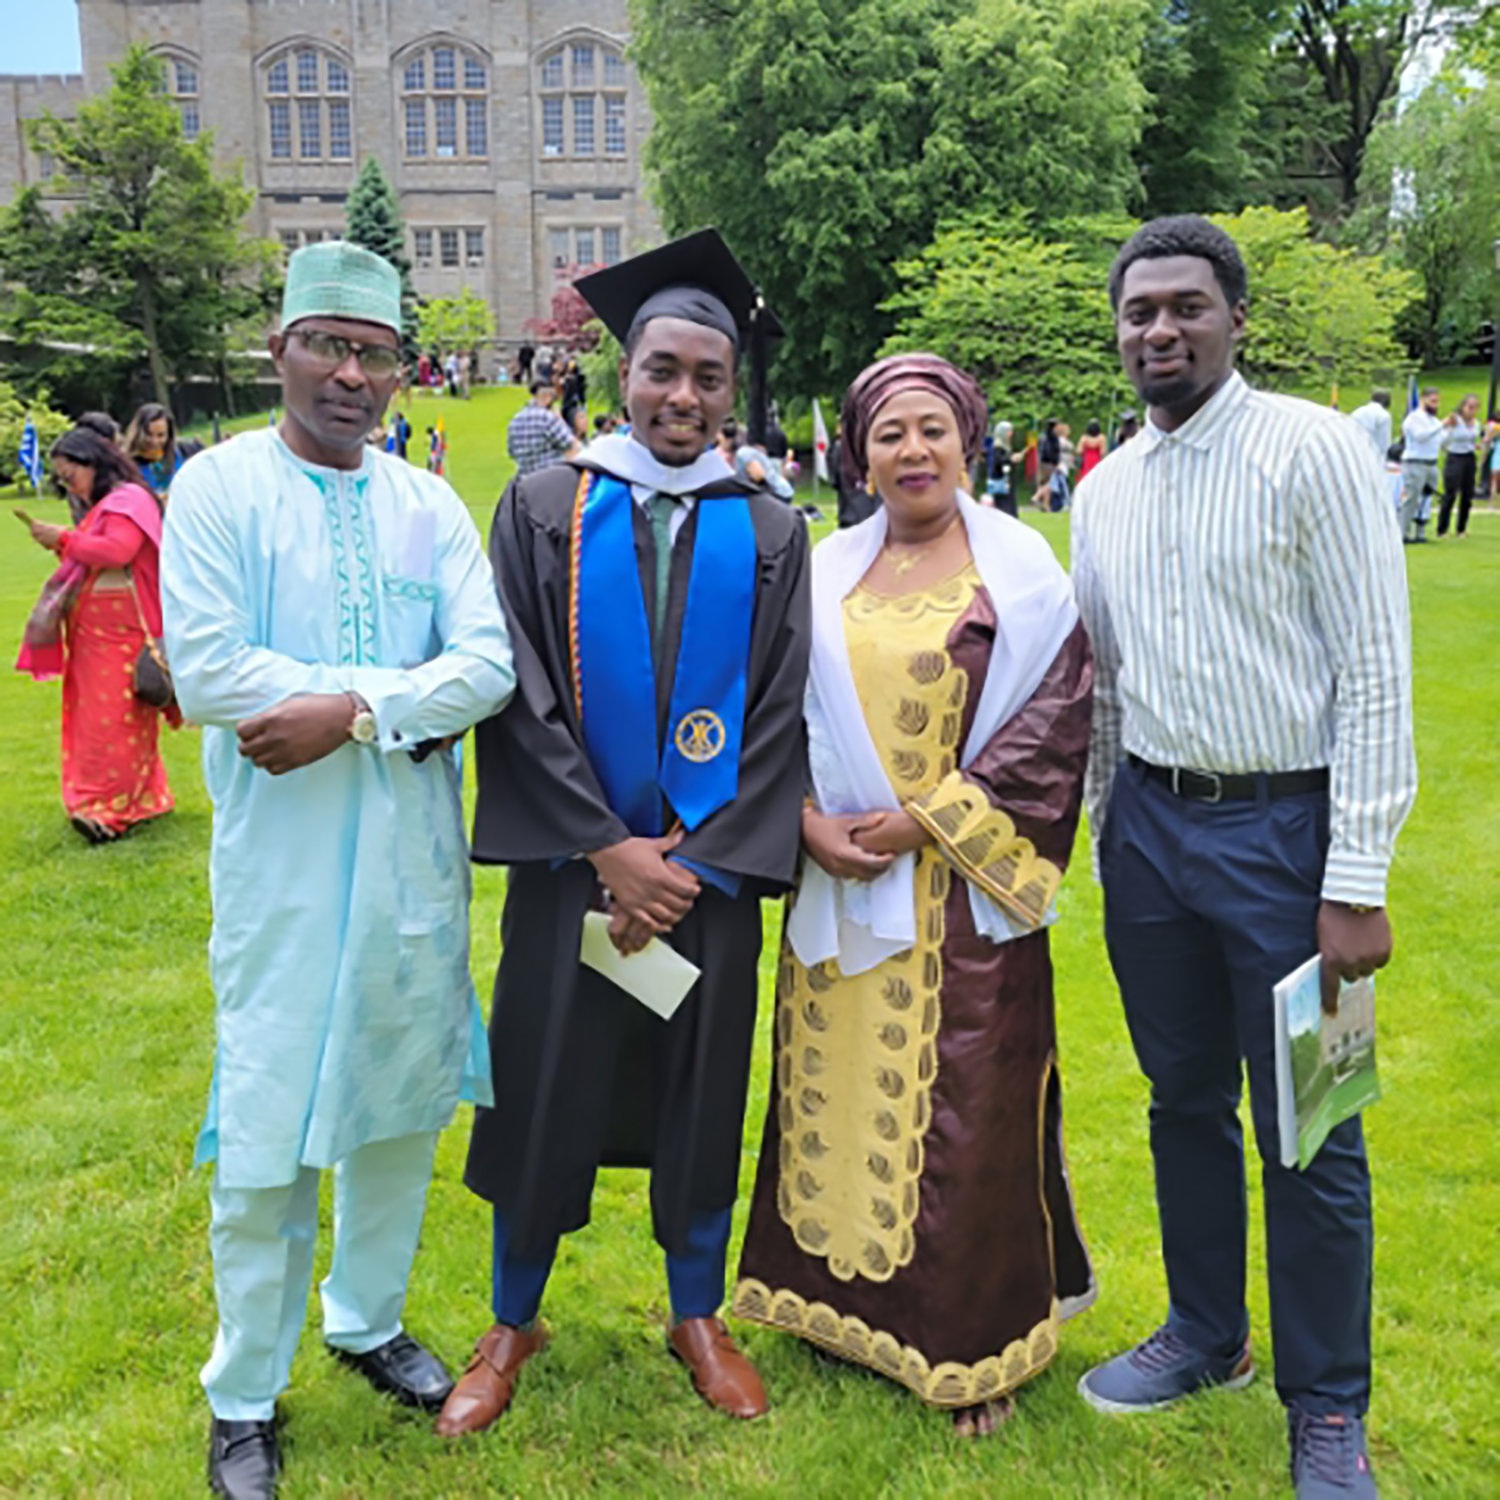 Hussein Abdul's family, from left at the Lehman College graduation, include his father Abdul Hussein, his mother Zalia Musah, and his brother Hashim Abdul. Hussein collected his political science degree on May 26 in a ceremony that was kept as a surprise from Abdul's parents. On top of that, they were not aware he was chosen as one of the ceremony’s speakers.